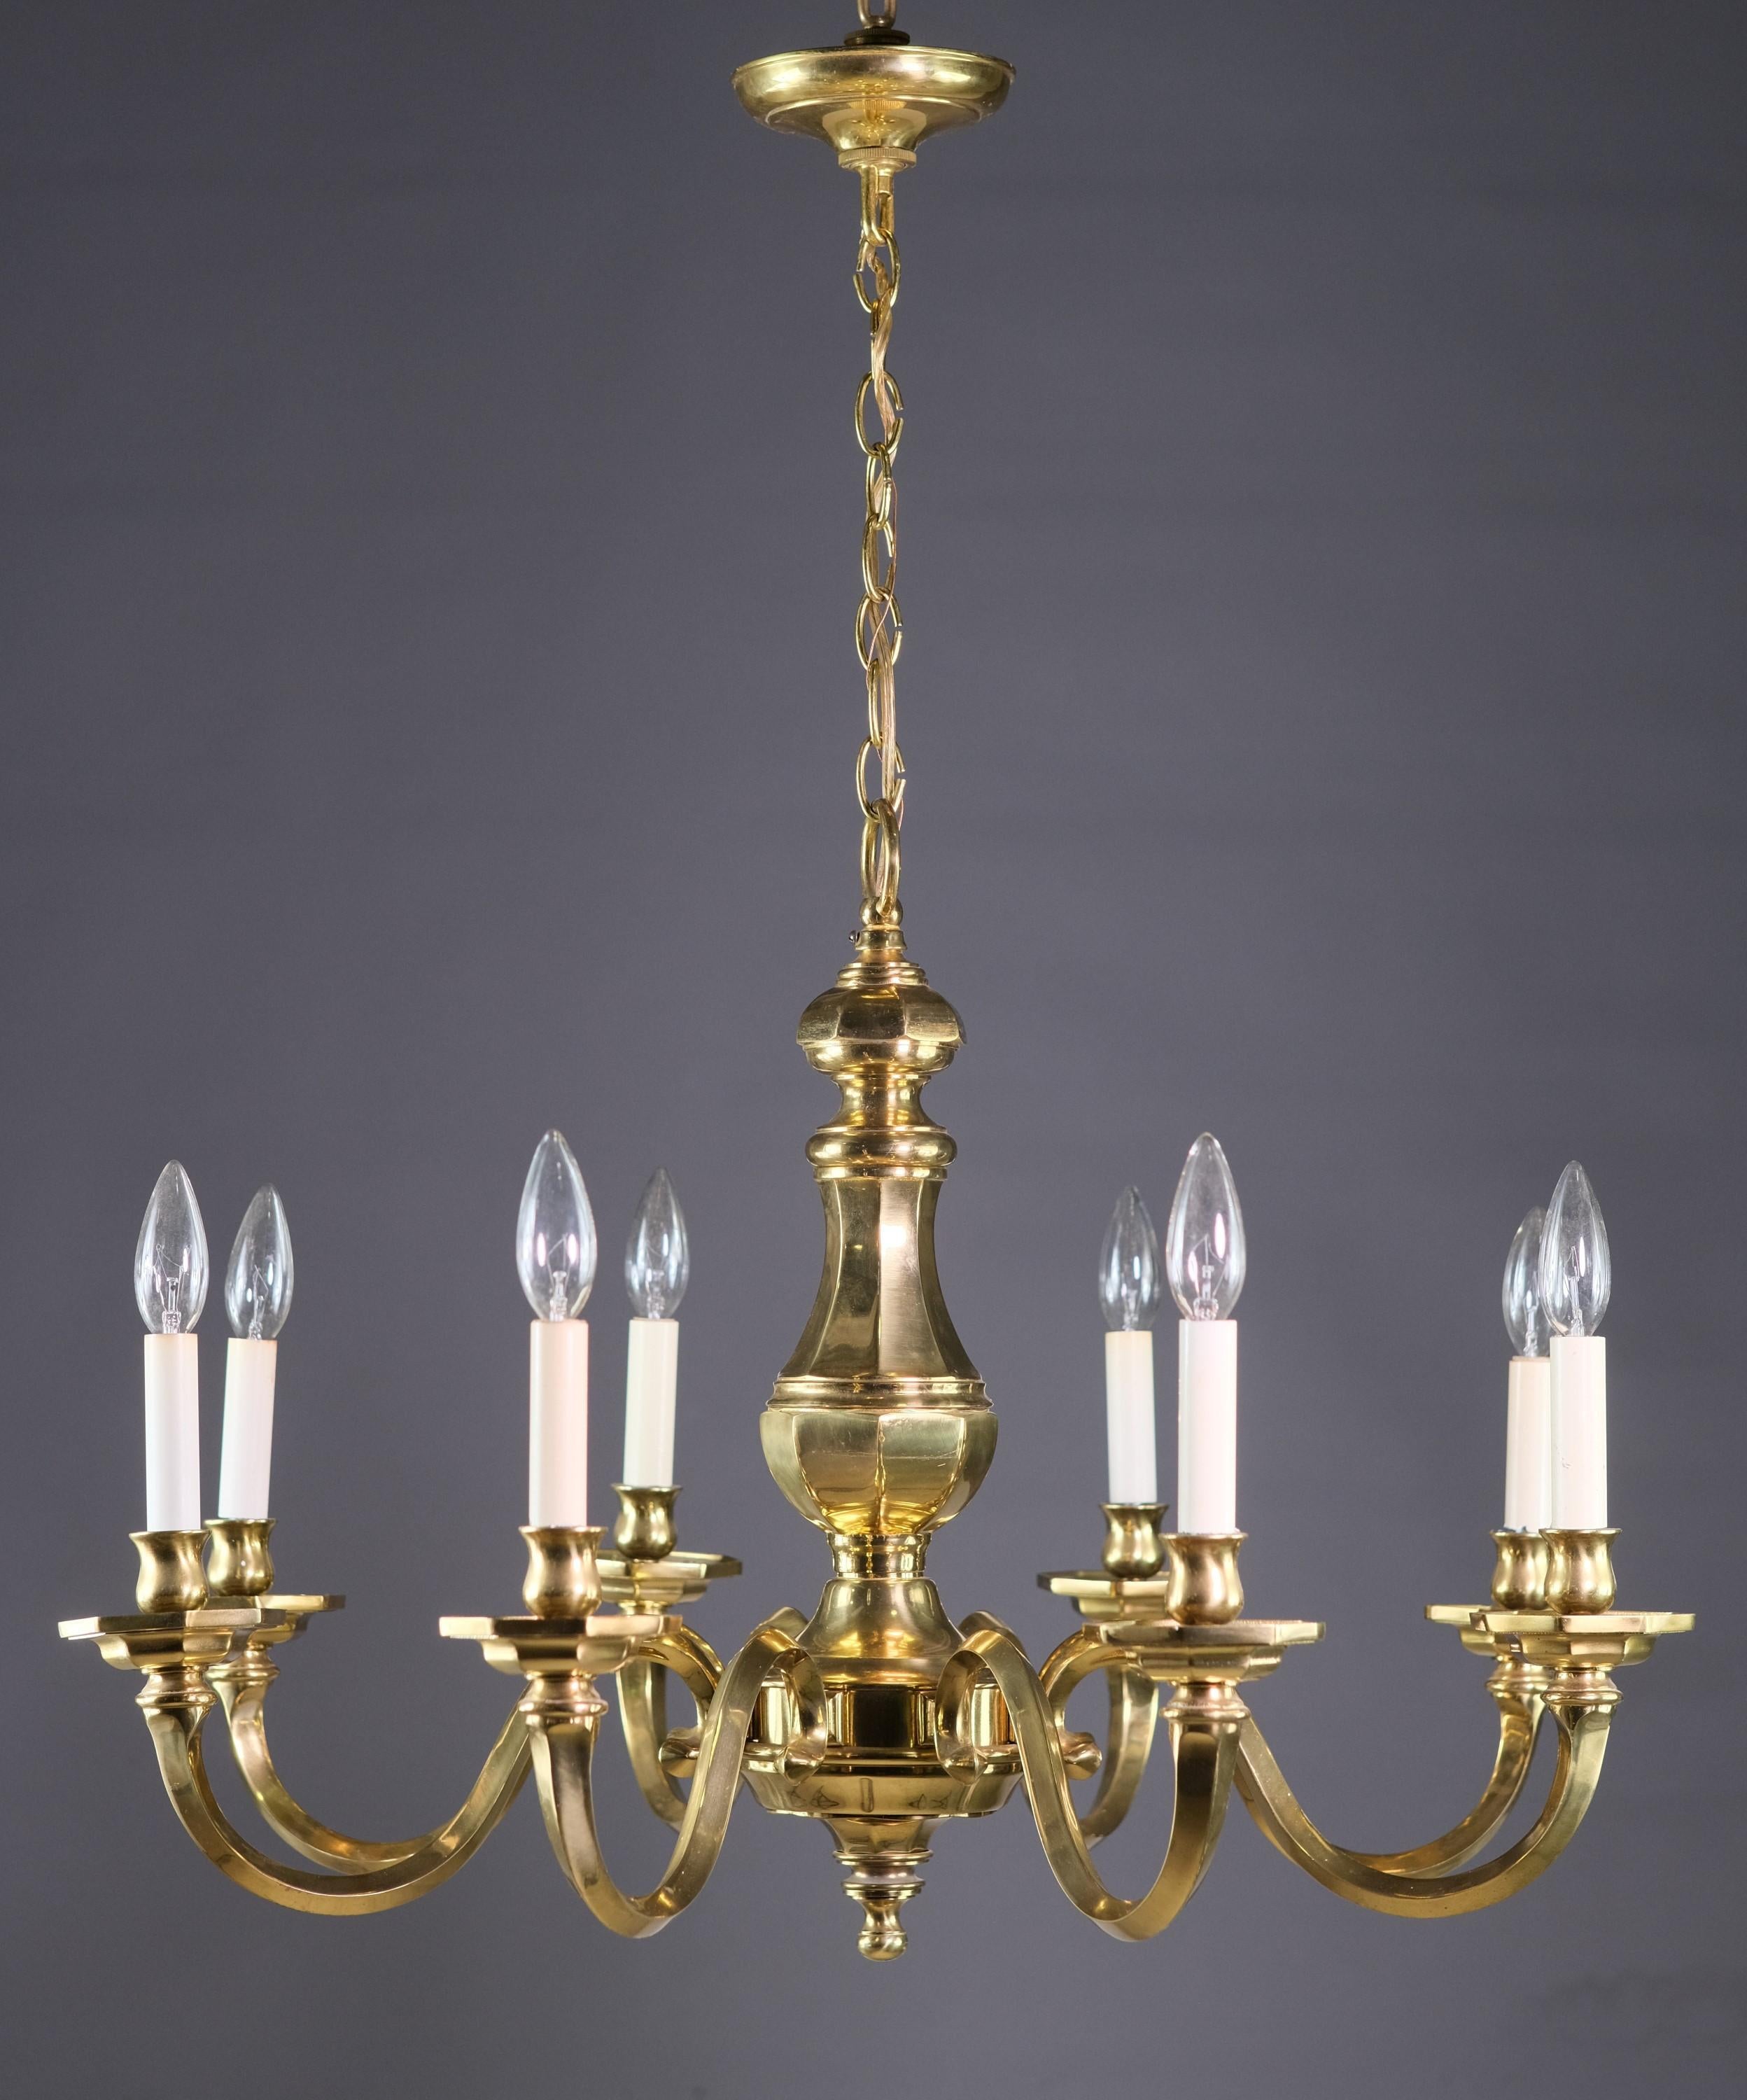 1980s Williamsburg style brass chandelier featuring an octagon shaped body and matching bobeches.   There are eight arms which are of a heavy cast brass with candlestick lights.  It originated from the 41st floor suite A of the NYC Waldorf Astoria